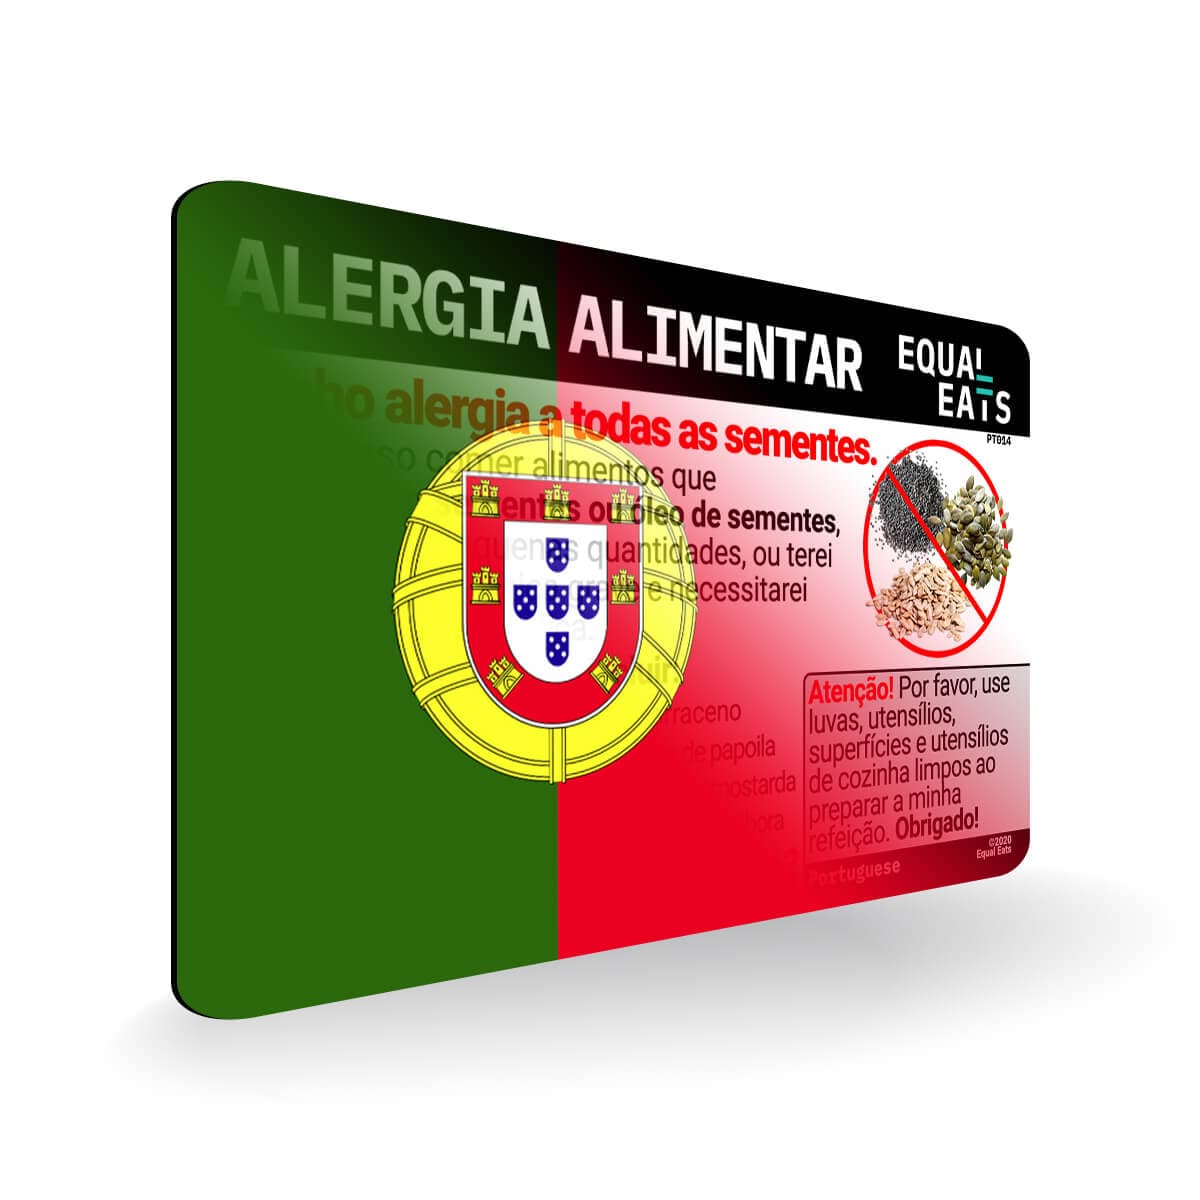 Seed Allergy in Portuguese. Seed Allergy Card for Portugal